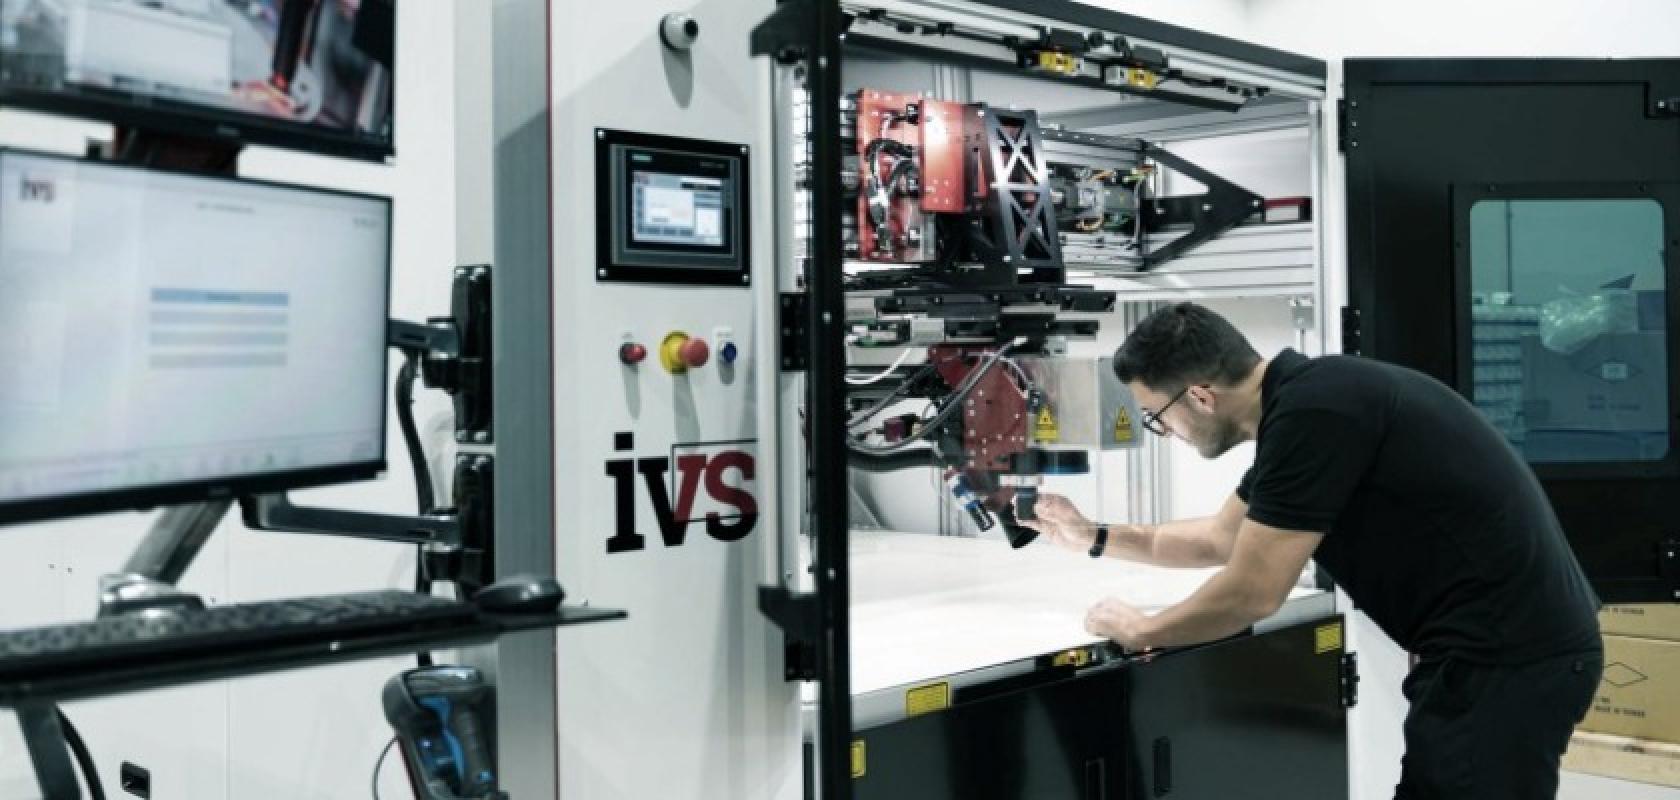 Oxford Metrics is set to purchase Industrial Vision Systems for an £8.1m as it continues to scale (Image: Oxford Metrics)